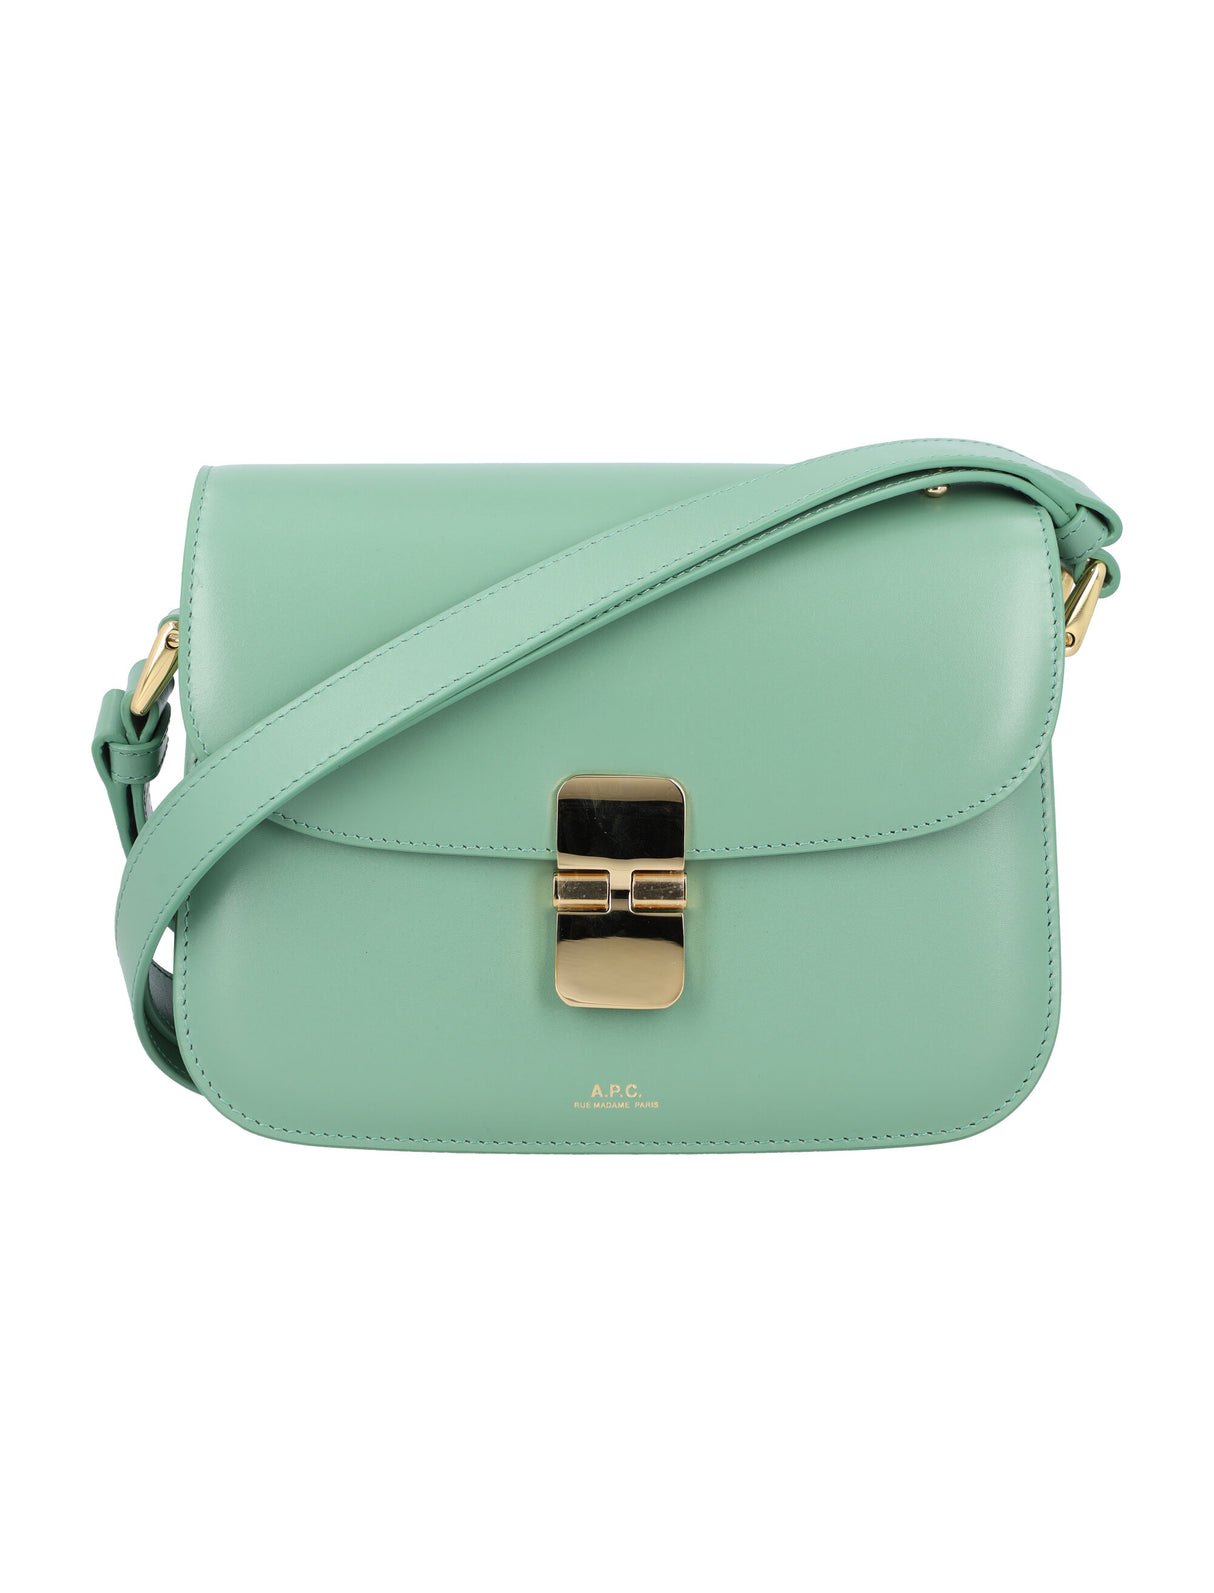 A.P.C. Chic Jade Green Leather Mini Handbag with Goldtone Details and Adjustable Strap